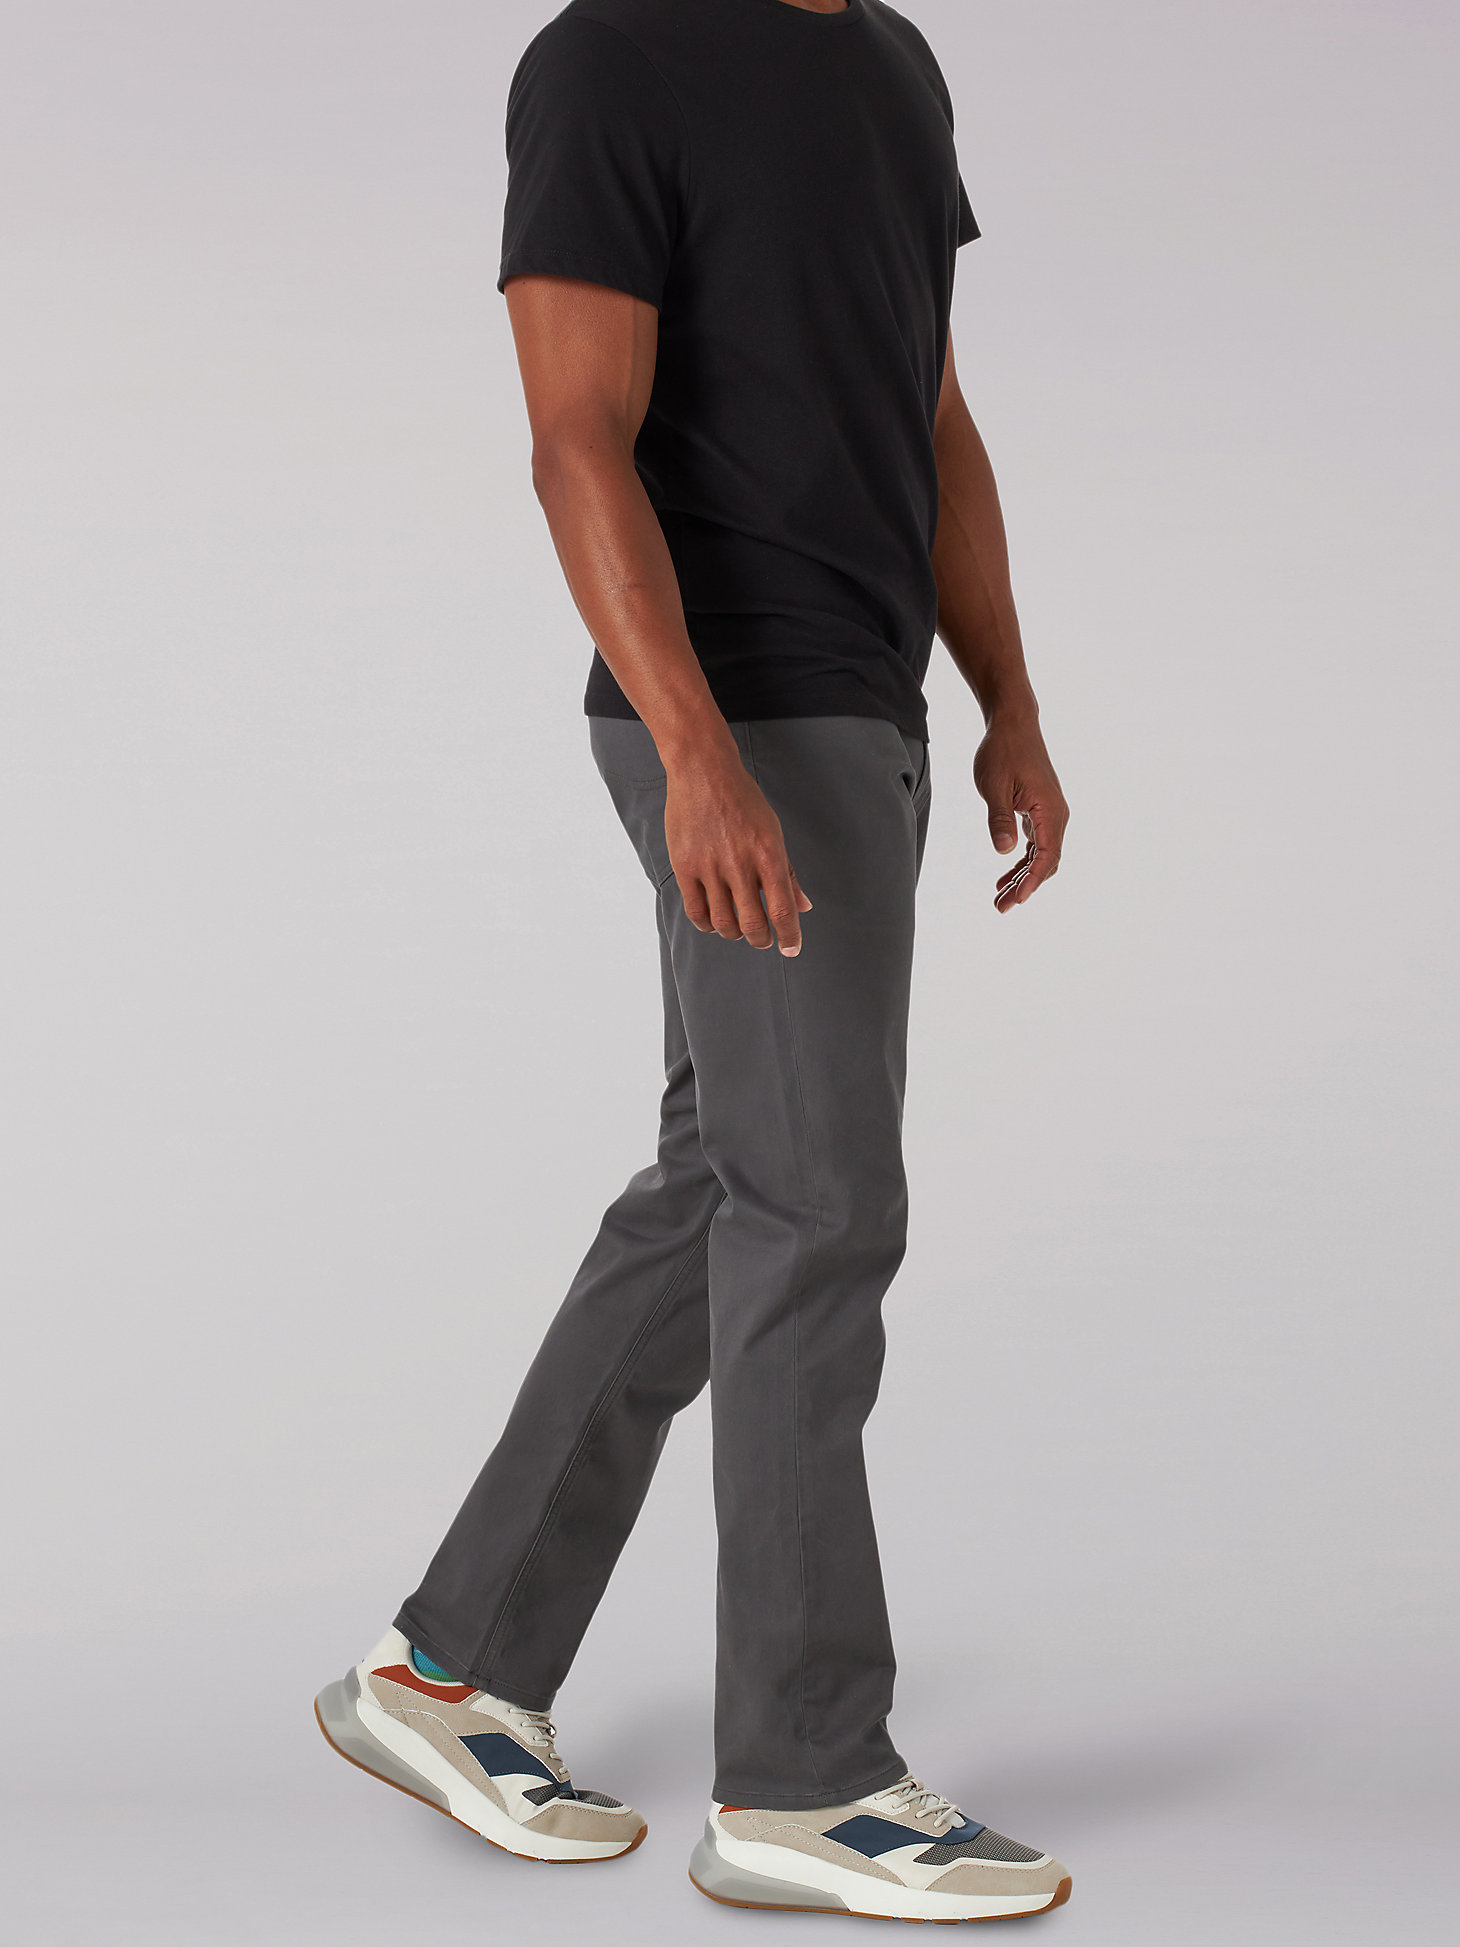 Men's Extreme Motion Super Soft Straight Fit Twill Jean in Engineer alternative view 2